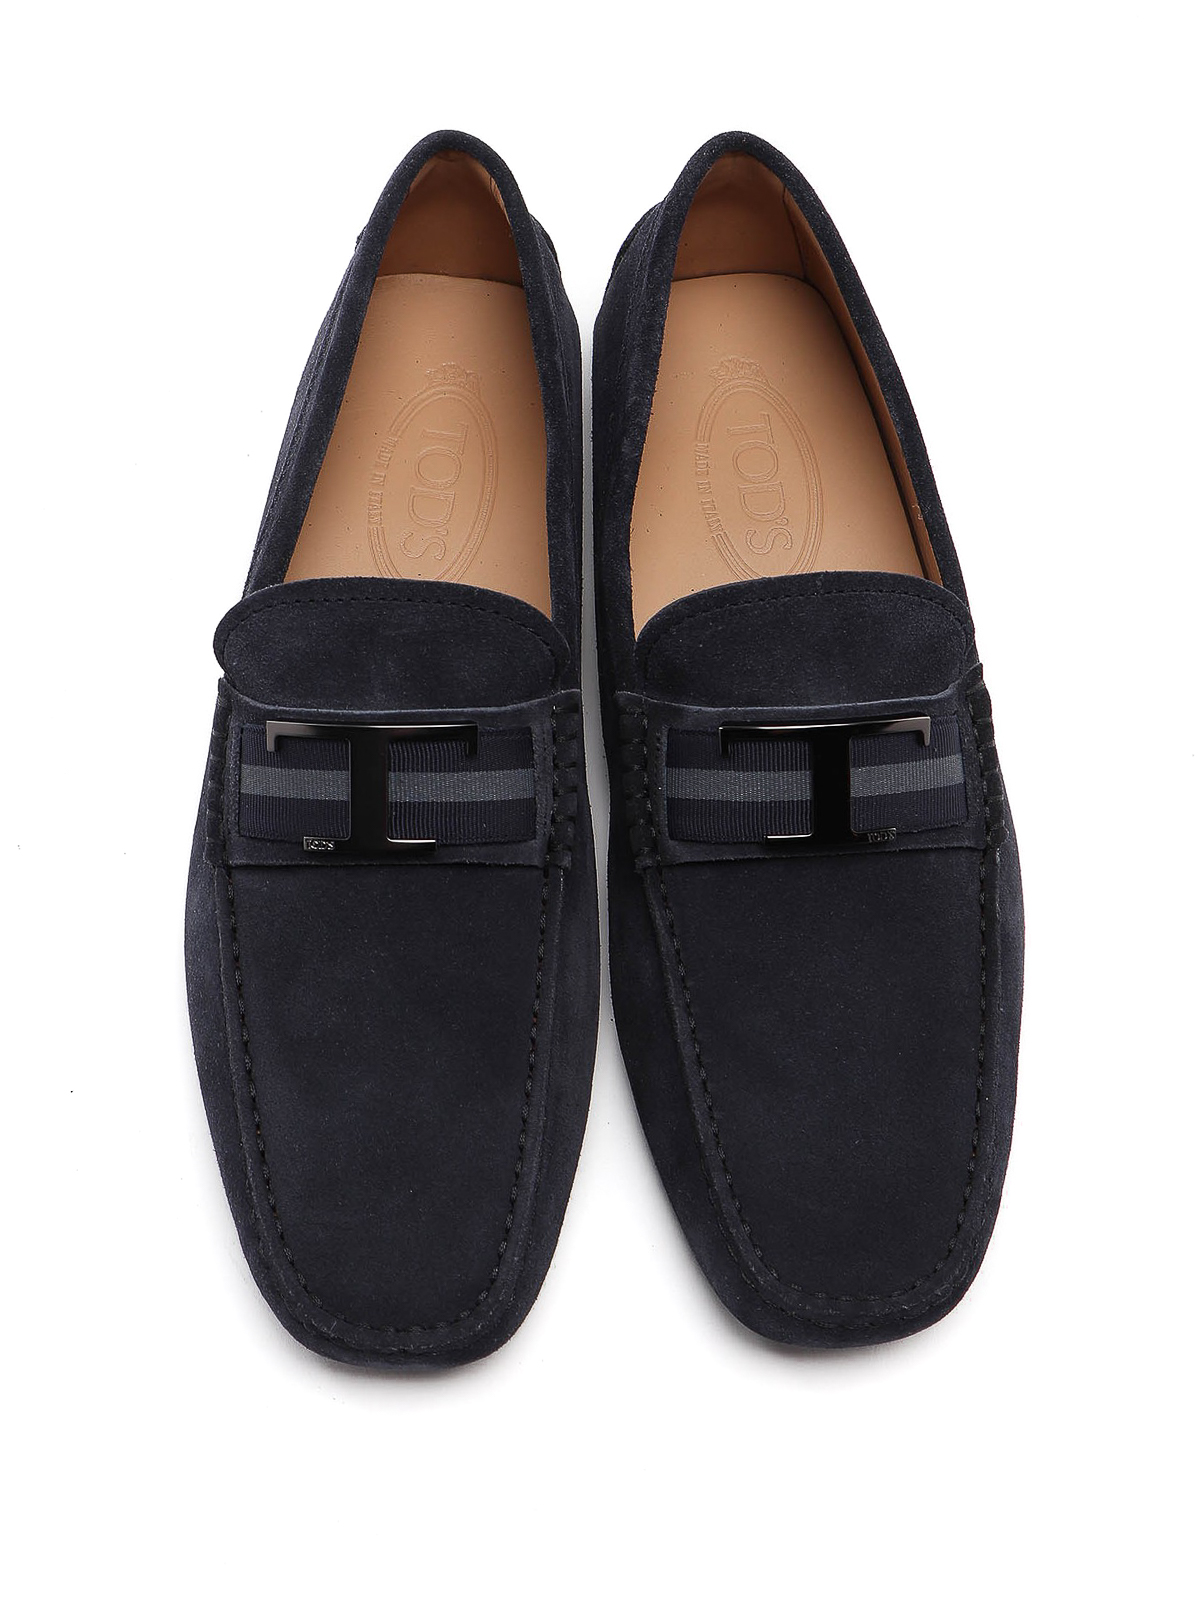 tod's driving loafers